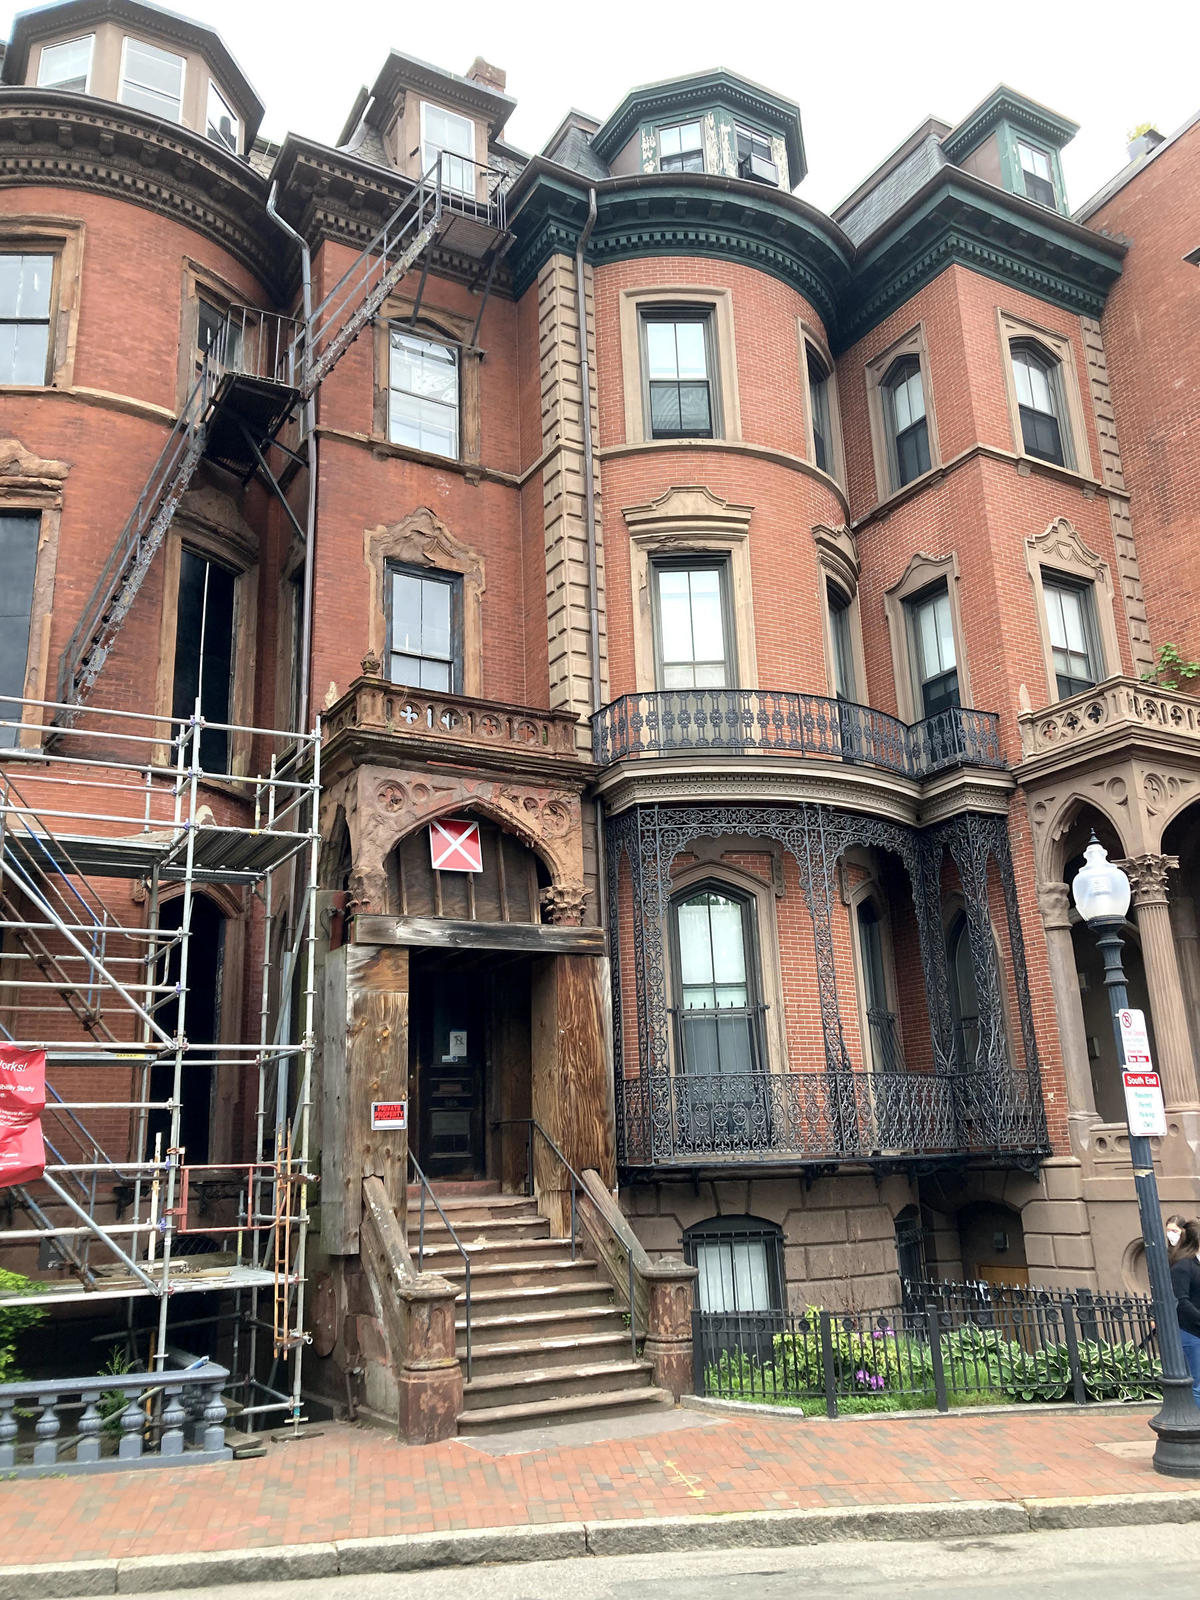 A 3-story brick townhouse with ornate decoration and a scaffolding partially obscuring half of the building